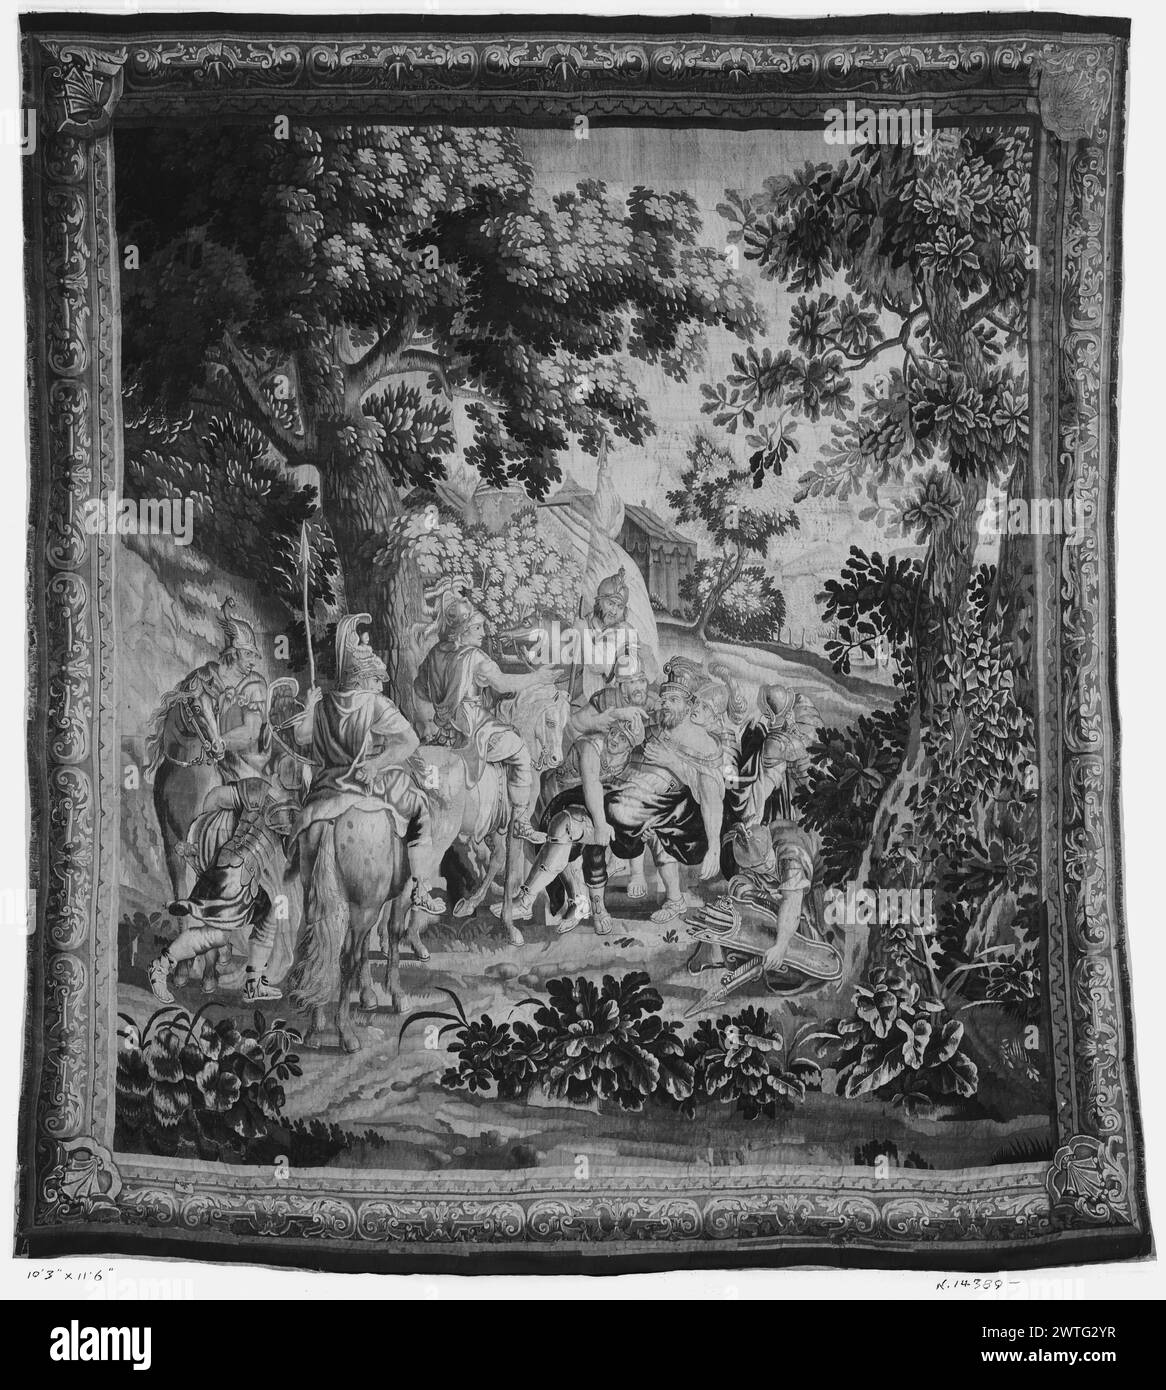 Clemency of Alexander. Le Brun, Charles (French, 1619-1690) (designed after) [painter] c. 1700-1725 Tapestry Dimensions: H 11'6" x W 10'3" Tapestry Materials/Techniques: unknown Culture: Flemish Ownership History: French & Co. received from P. Lorillard, invoiced 11/18/1929. United States, New York, New York, Harvard Club of New York City. Defeated King Porus, covered with wounds, comes before Alexander, who restores his dominions (BRD) abstracted acanthus-leaf motif with foliage moldings in each corner Composition reversed. French & Co. stock sheet in archive, 16706-d Related Works: Panels in Stock Photo